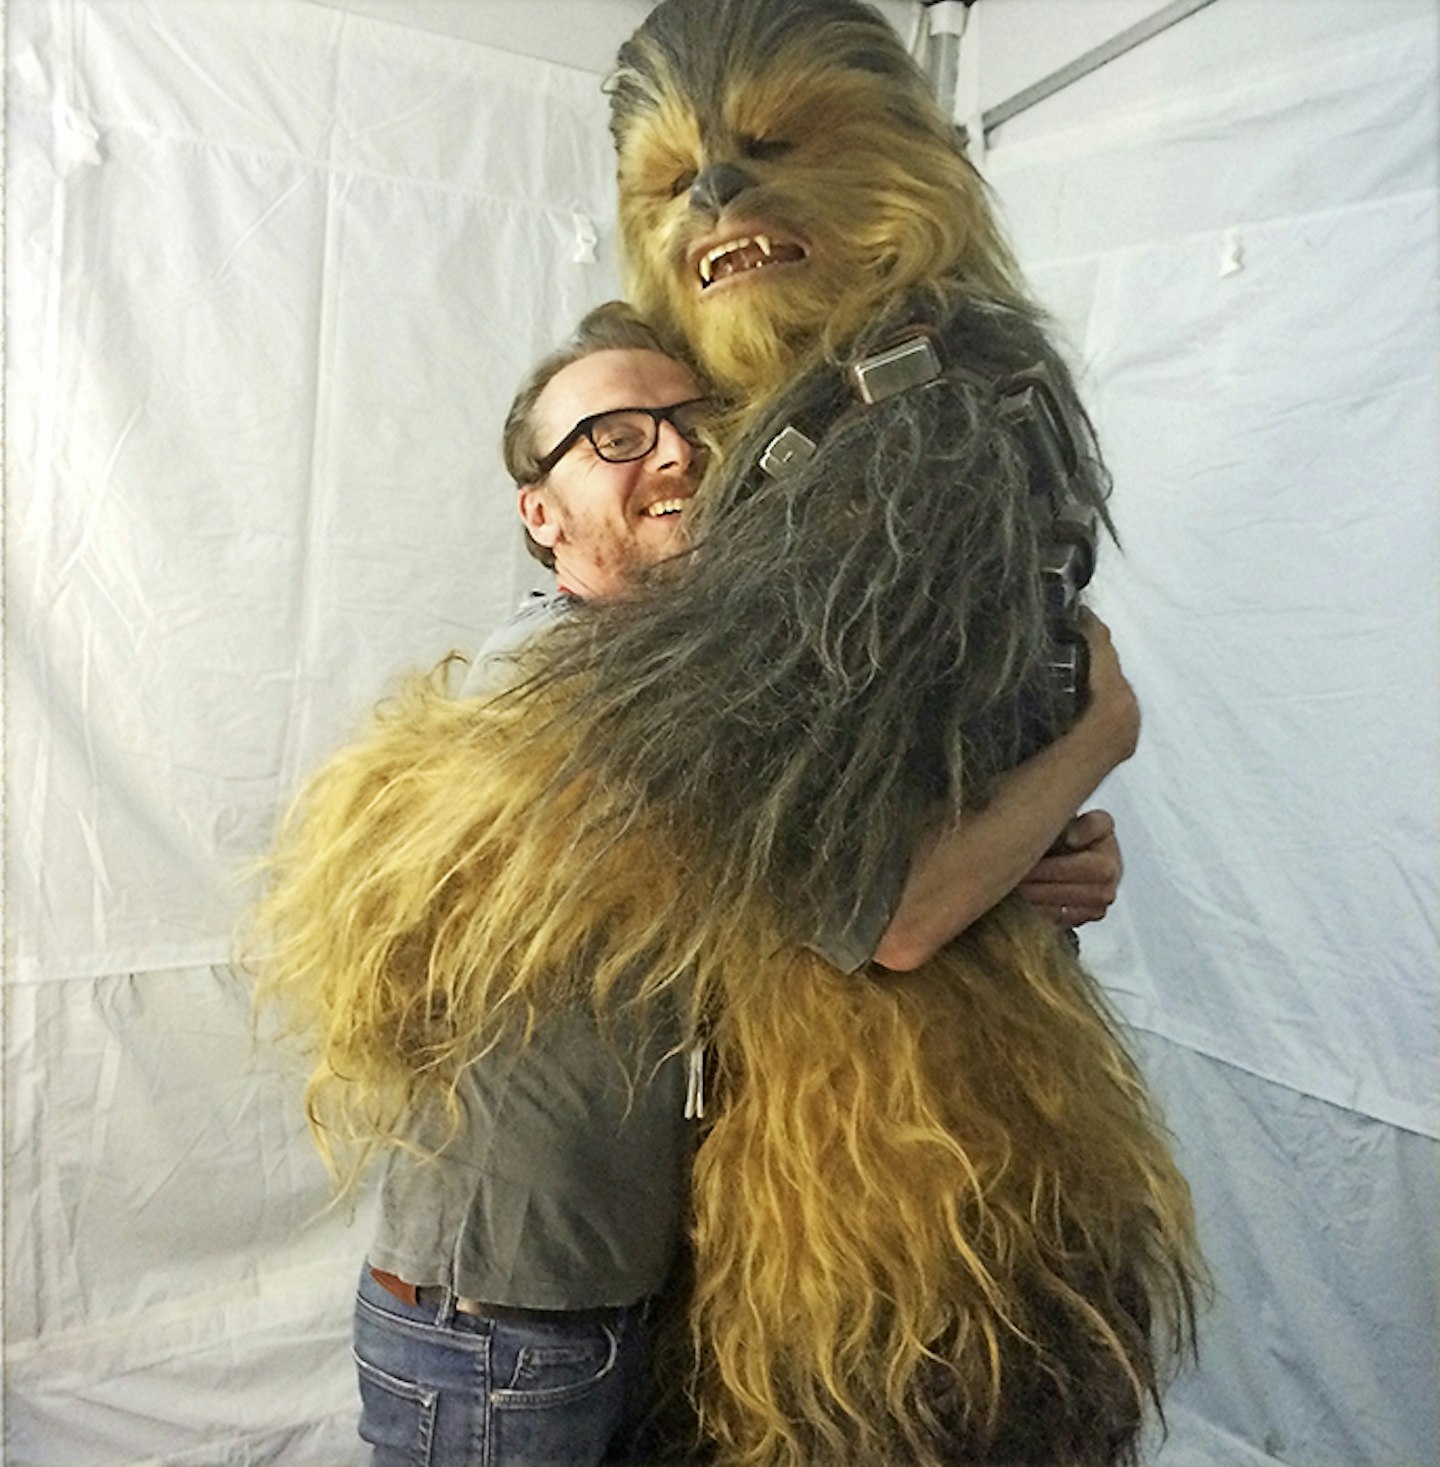 Simon Pegg and Chewie